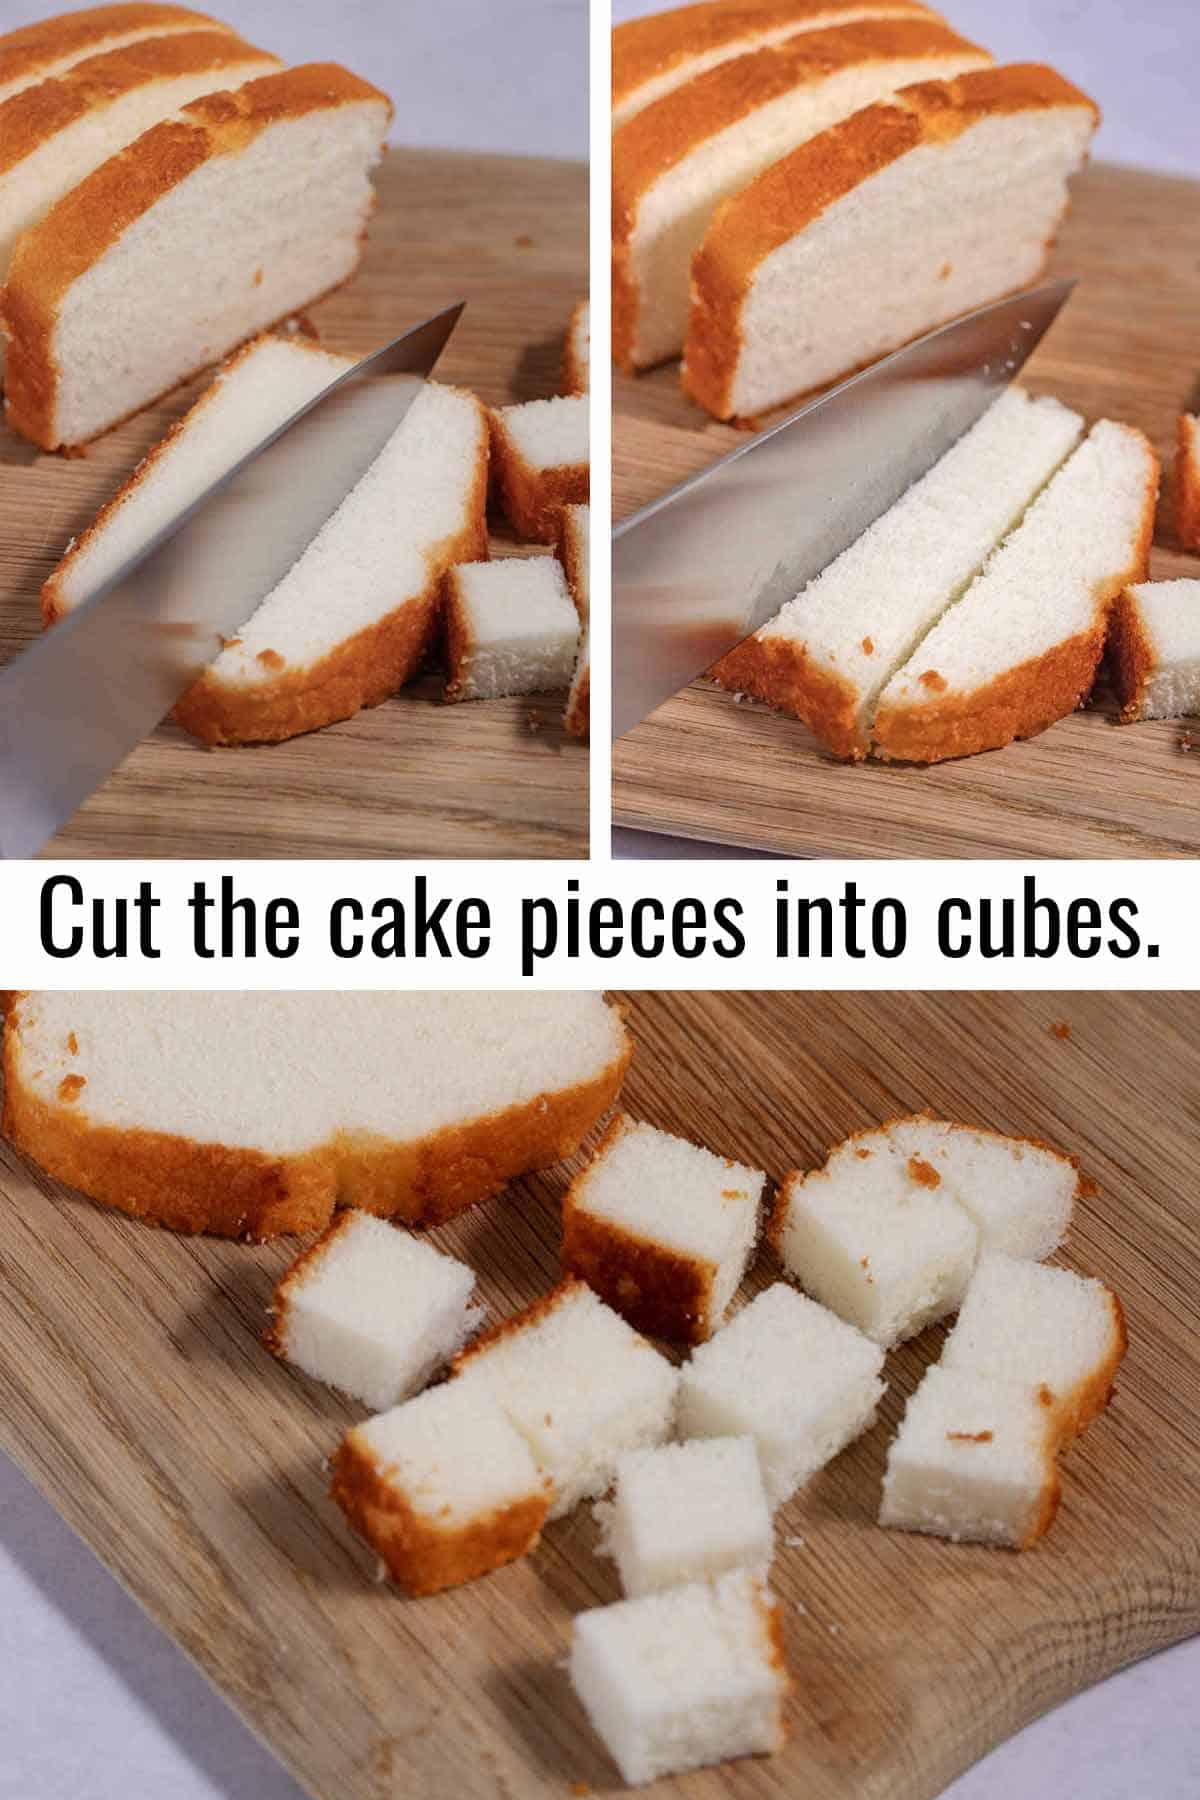 Step by step photos for cutting cake pieces into cubes.